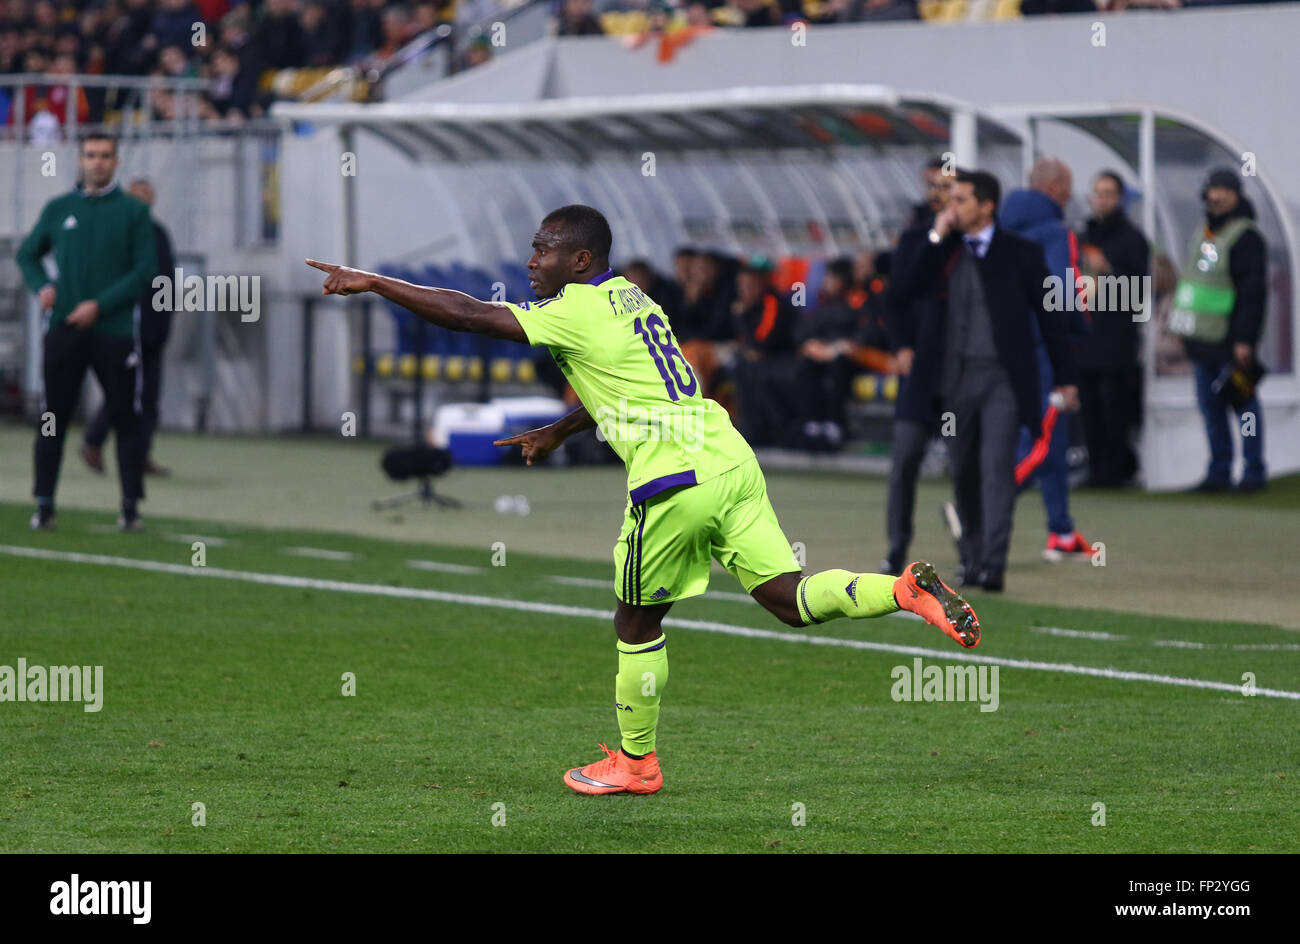 LVIV, UKRAINE - March 10, 2016: Frank Acheampong of RSC Anderlecht reacts after scored during the UEFA Europa League Round of 16 Stock Photo